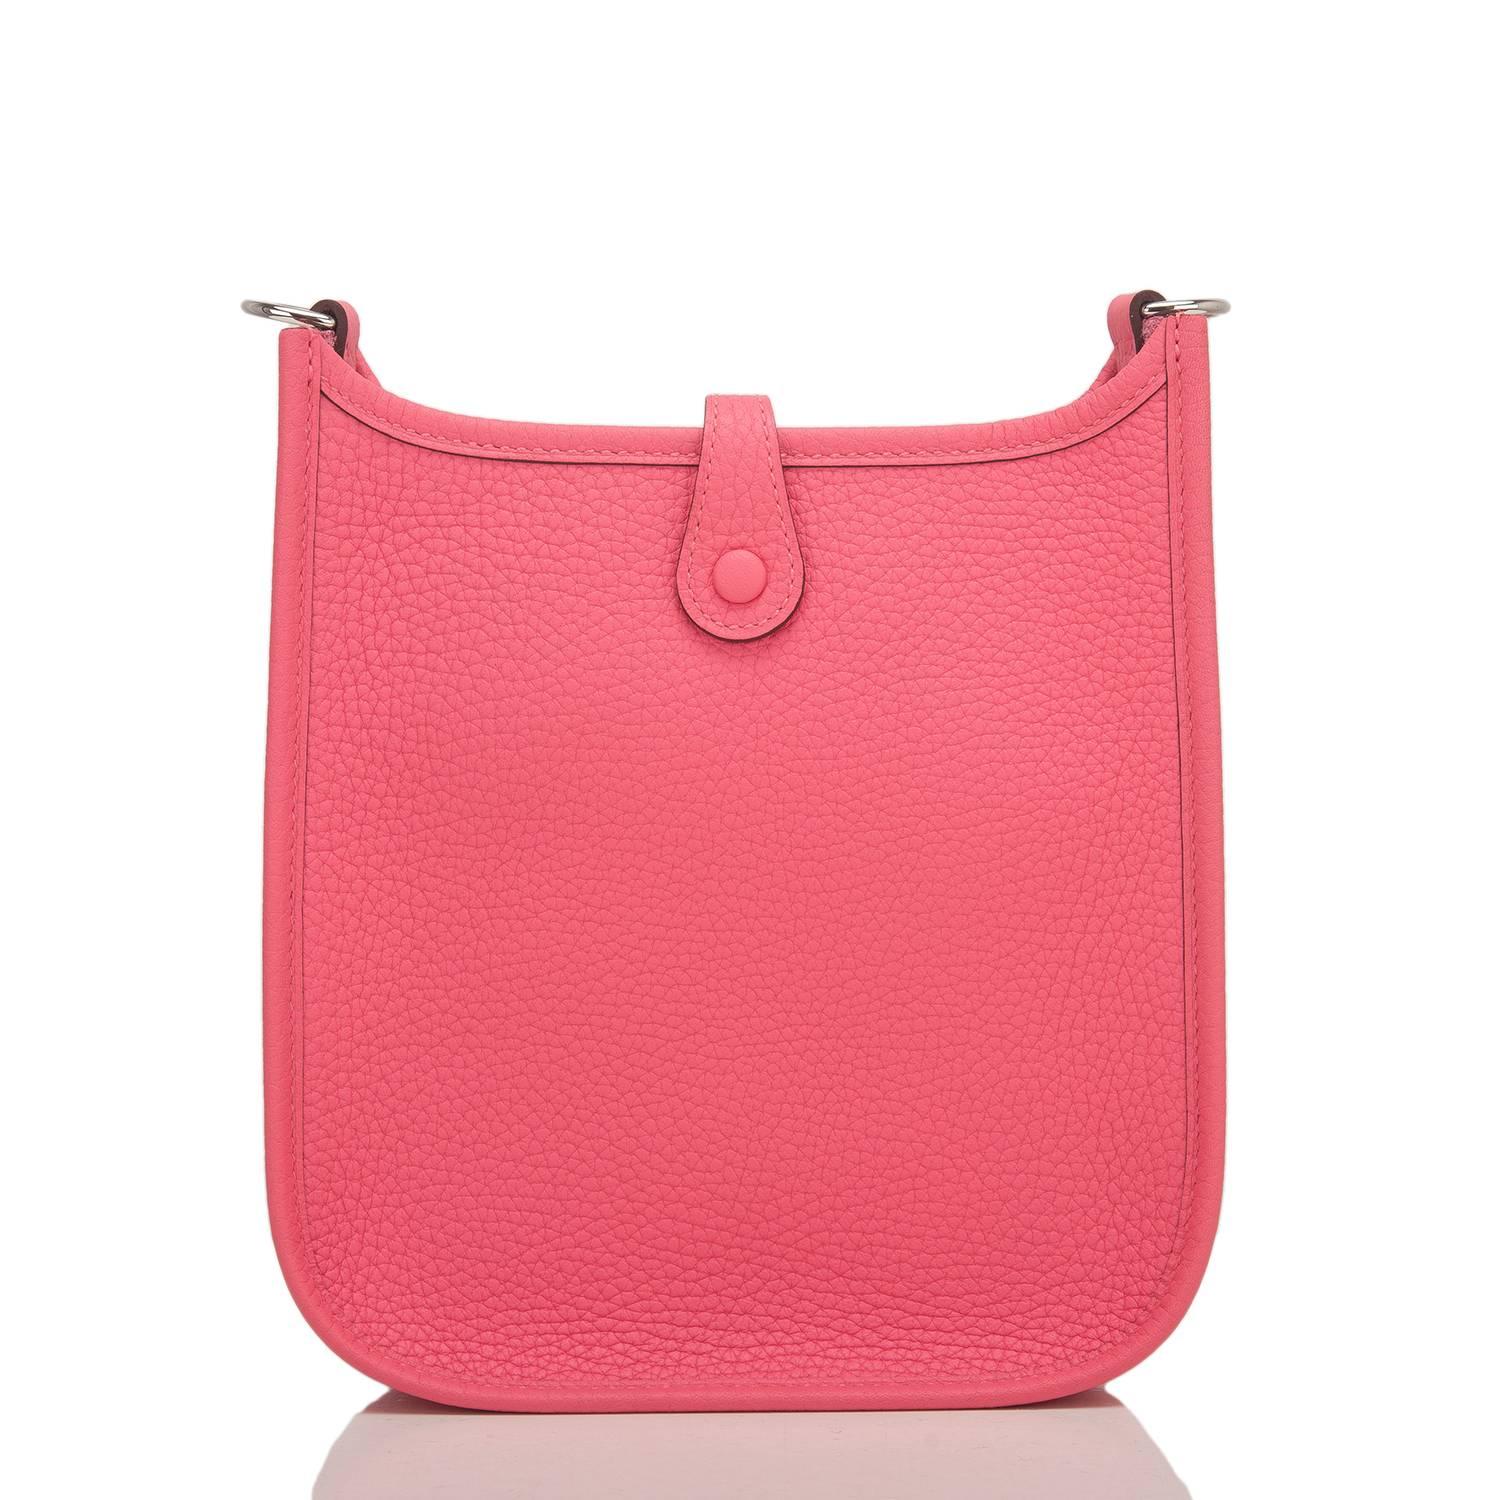 Hermes Rose Azalee Clemence Evelyne TPM Bag In New Condition For Sale In New York, NY